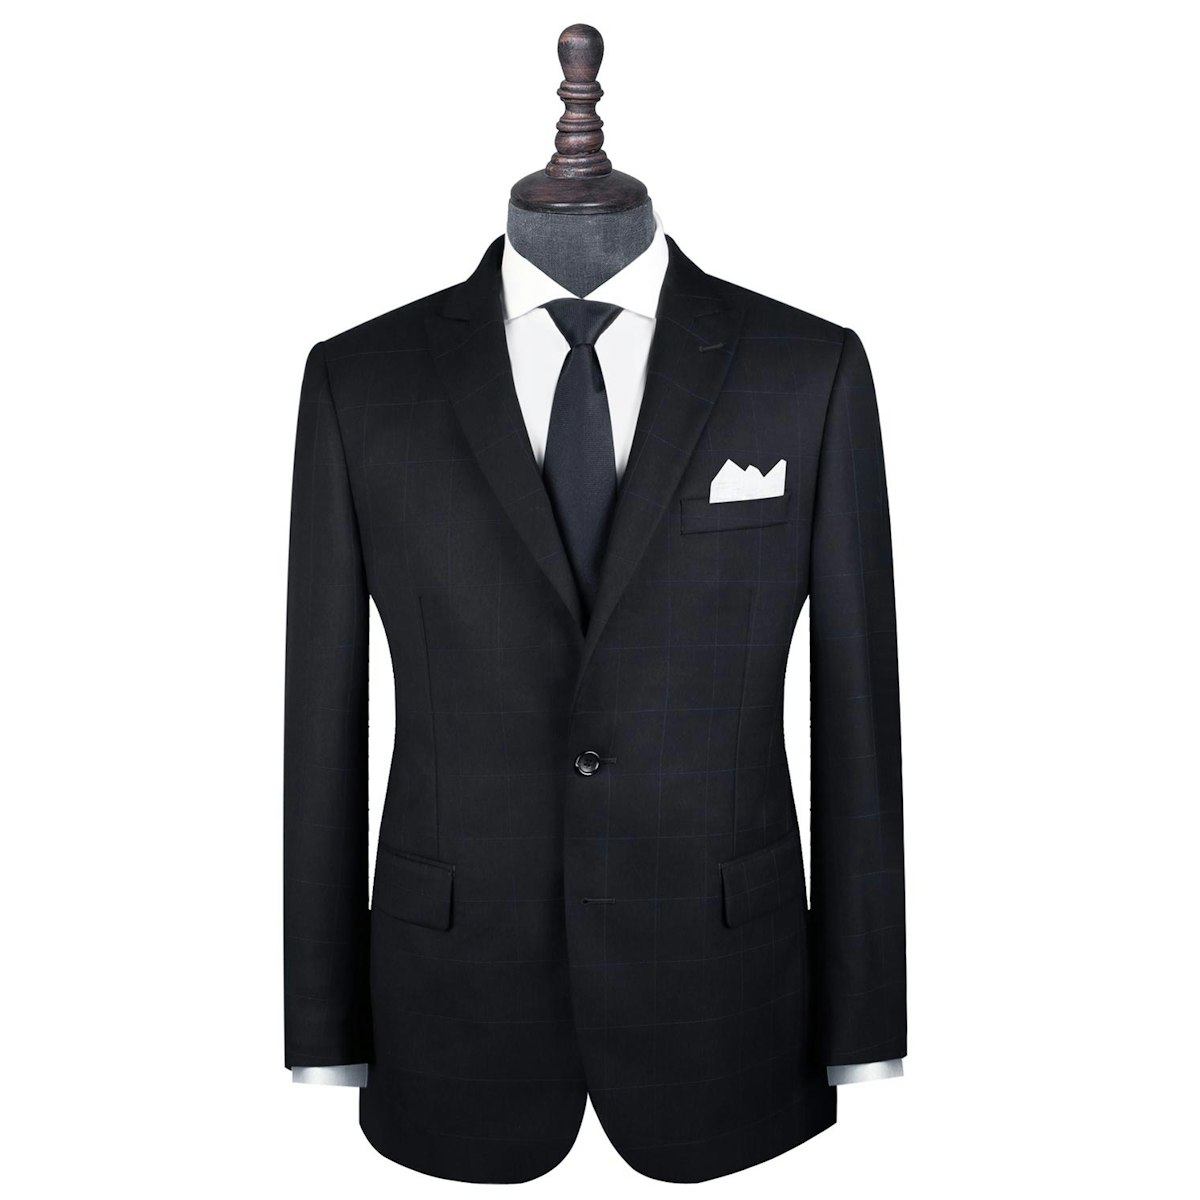 InStitchu Collection The Whitchurch mens suit